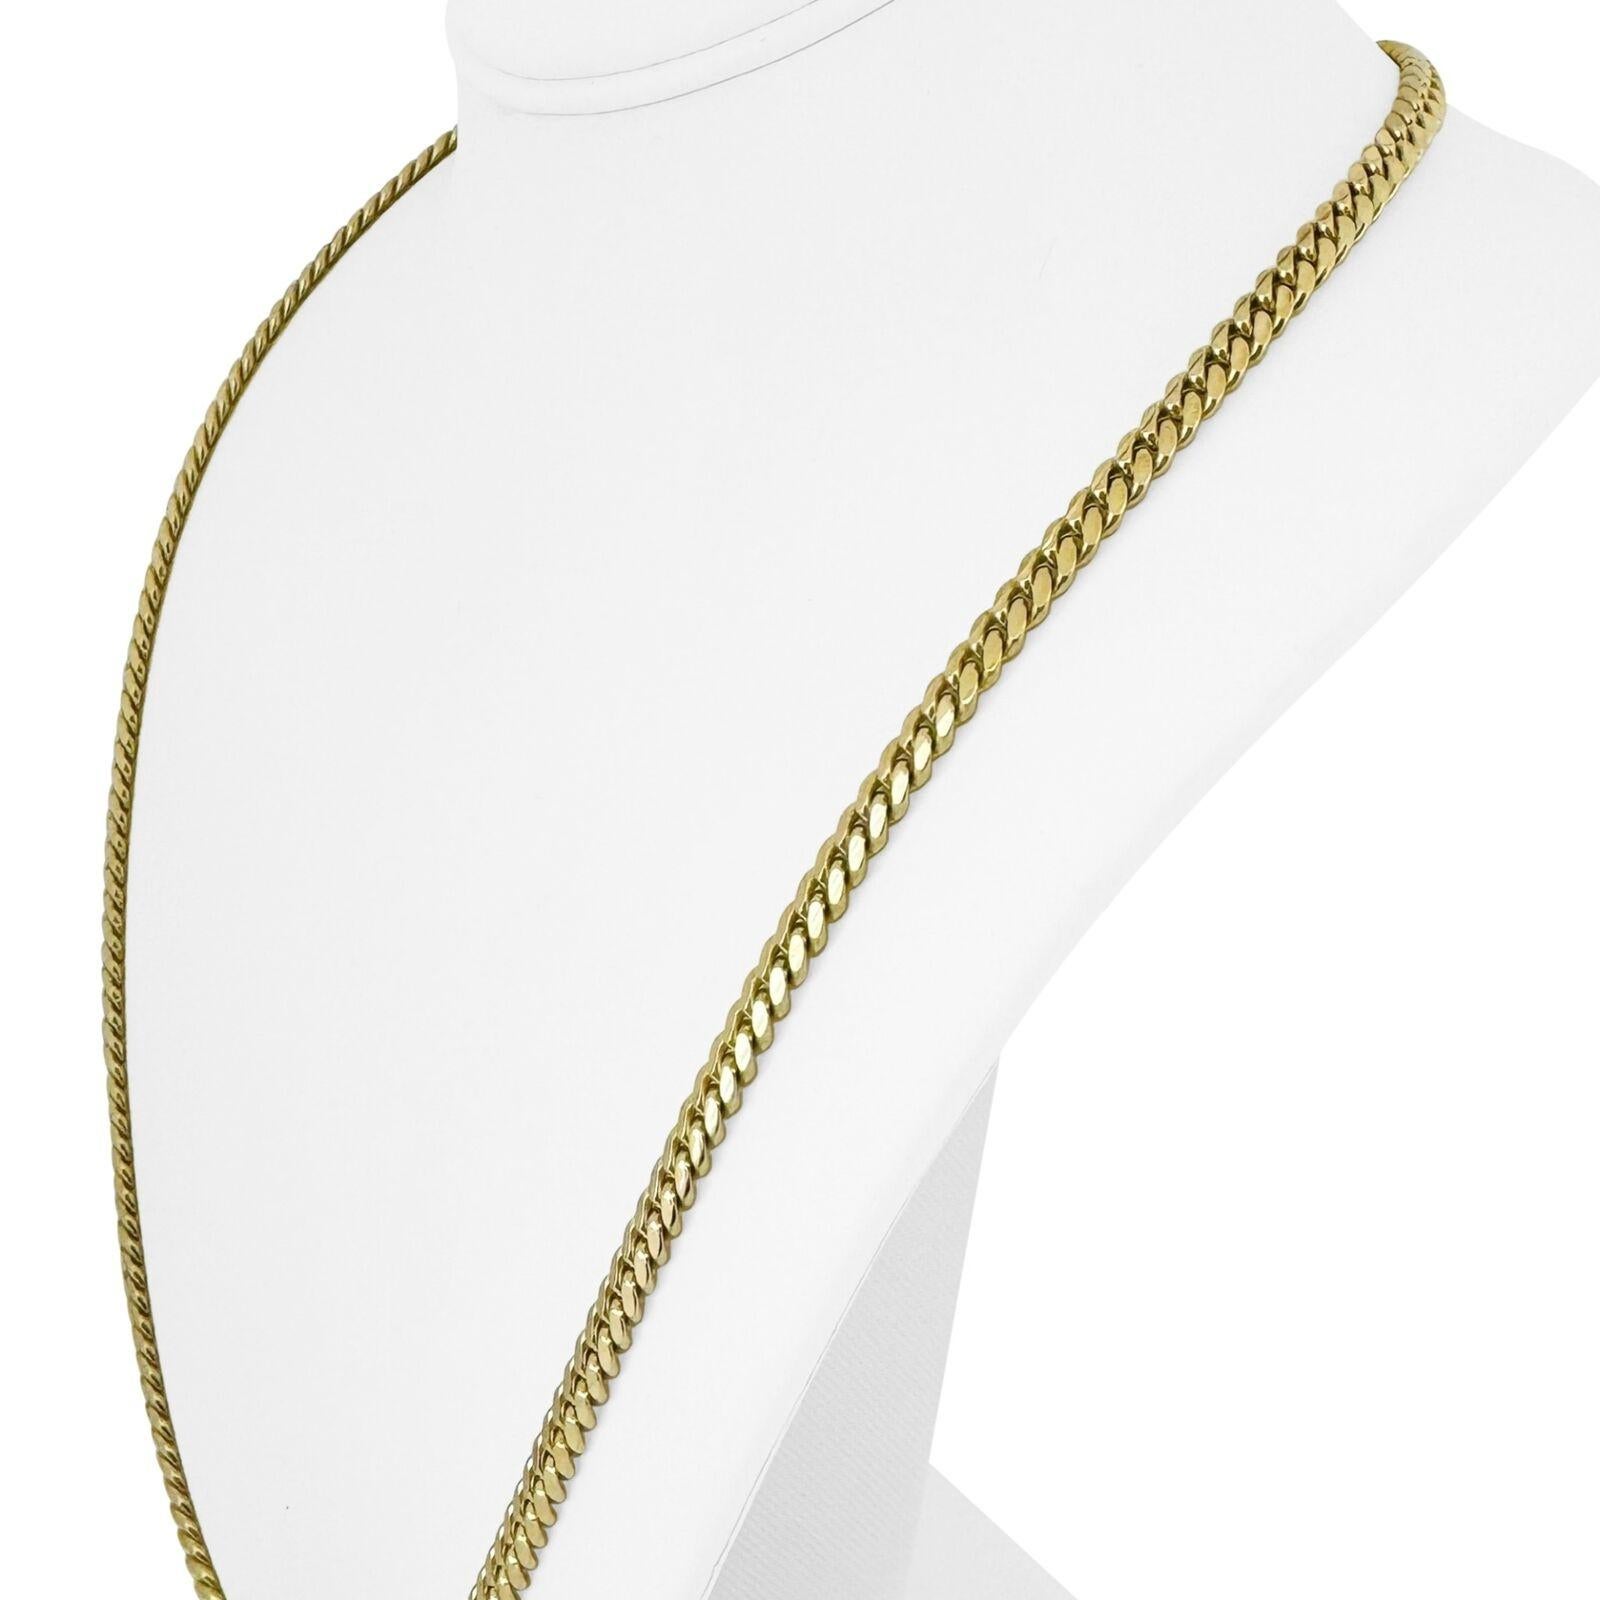 10k Yellow Gold 51.4g Solid Heavy 5mm Men's Cuban Link Chain Necklace 28